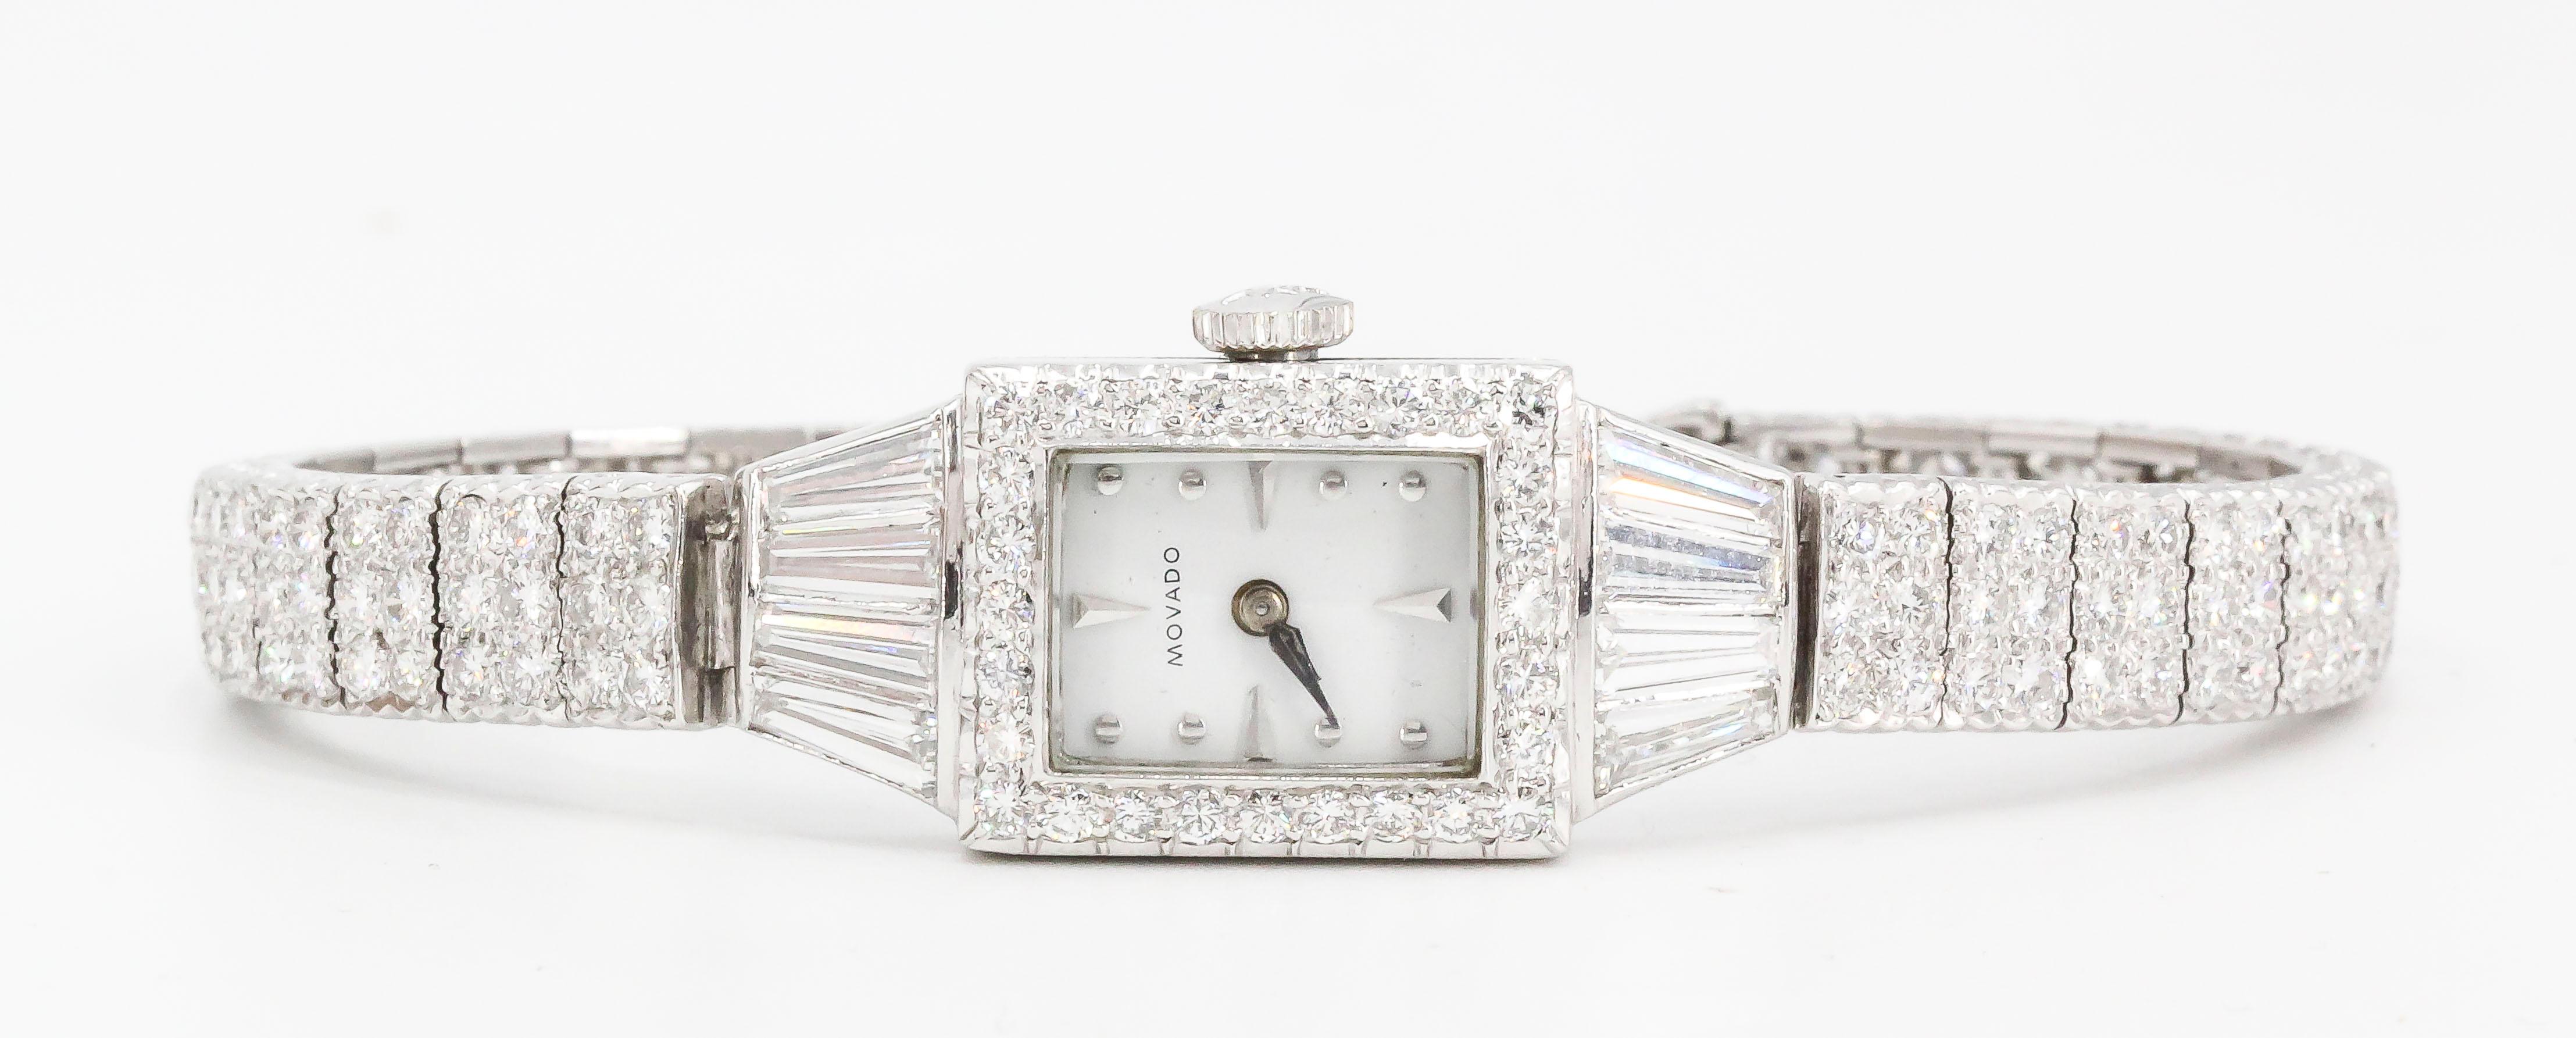 Chic diamond and platinum ladies wrist watch by Movado, circa mid century. It features high grade round brilliant cut and tapered baguette cut diamonds, approx. 5.0 cts total weight. Mechanism is mechanical. Measures approx. 6